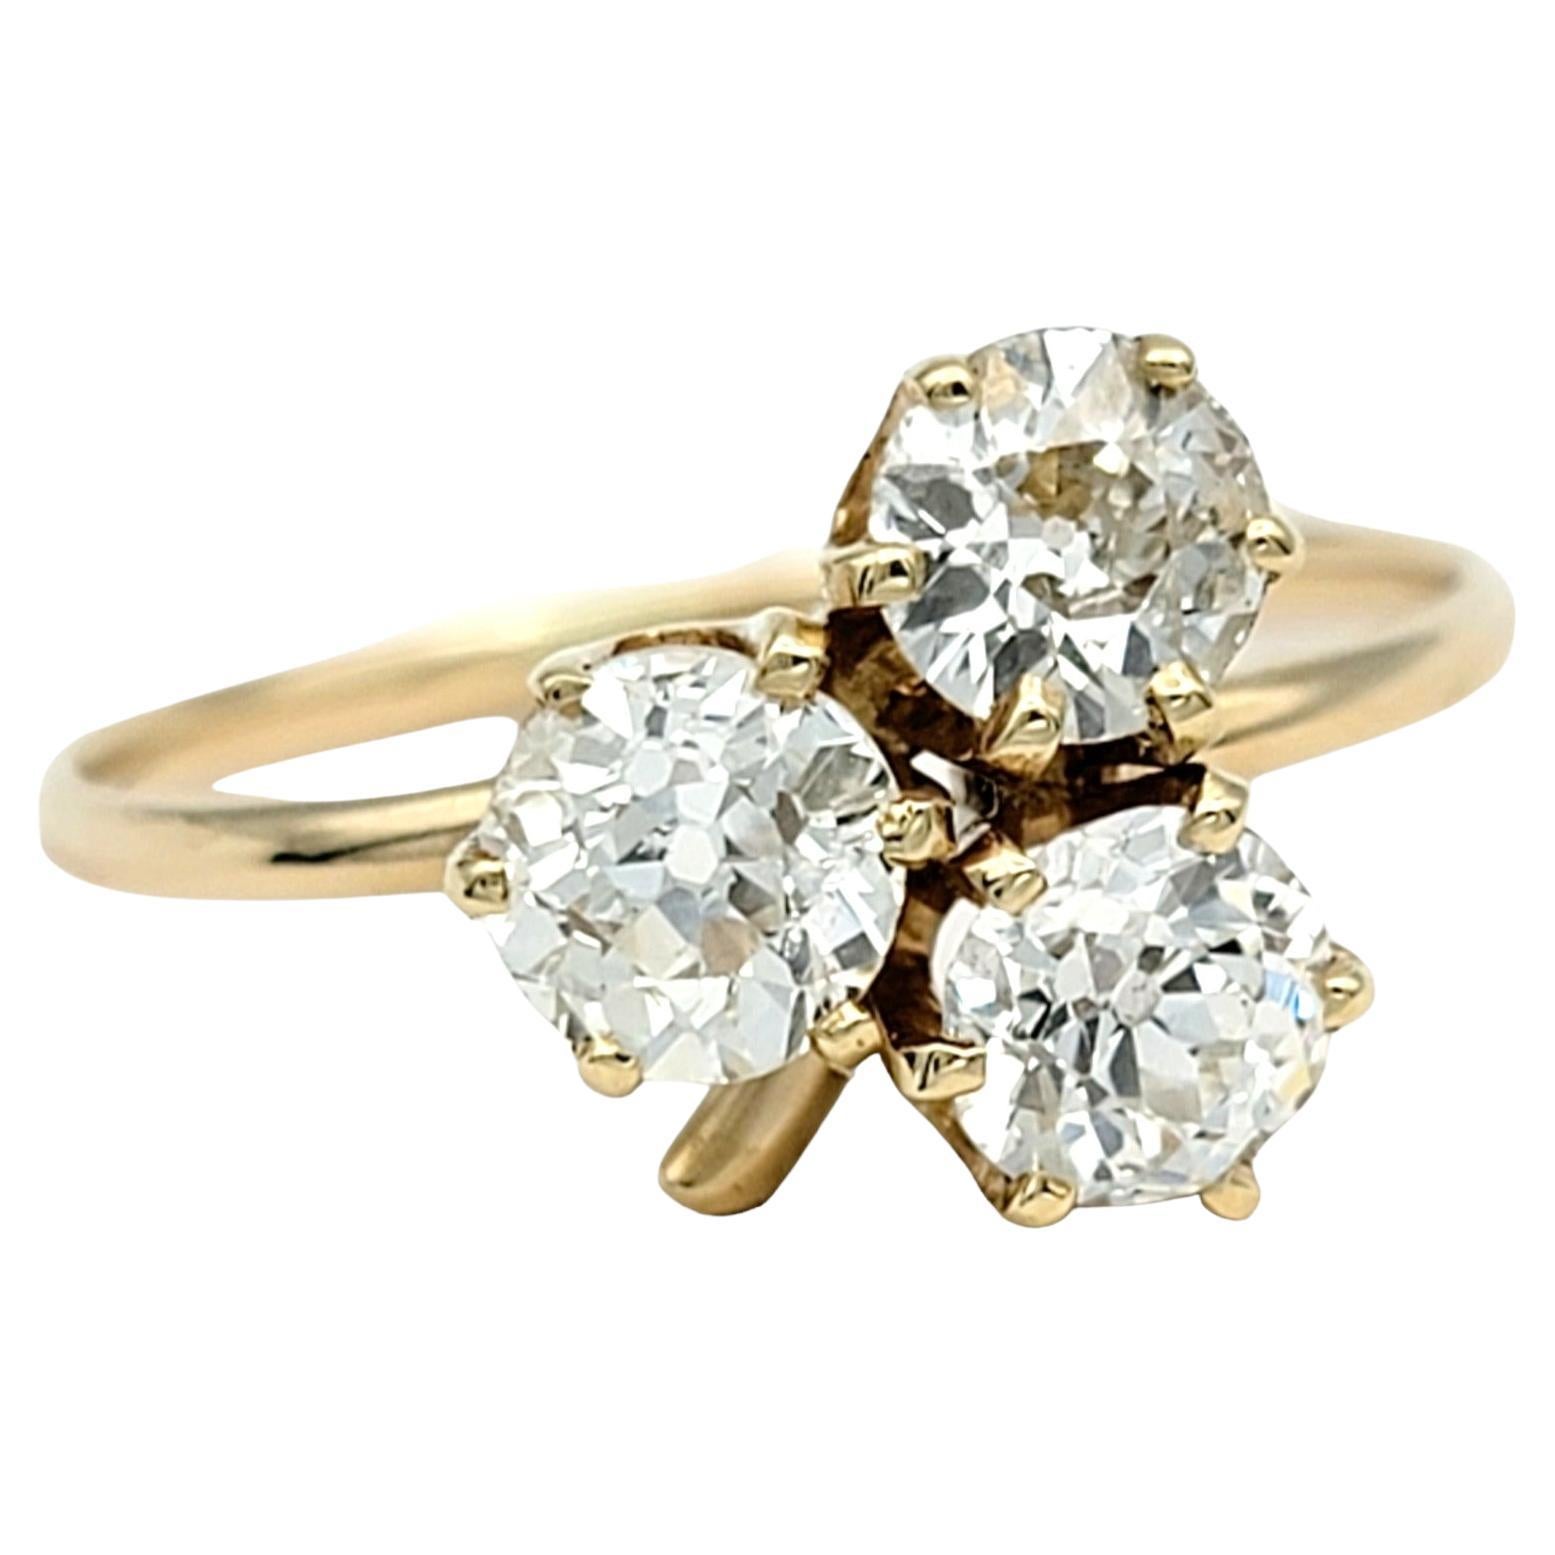 Ring Size: 5.5

Step back in time with this exquisite antique ring featuring a captivating trio of Old Mine Cut diamonds set in a charming clover motif. Crafted in luxurious 14 karat yellow gold, this piece exudes old-world charm and